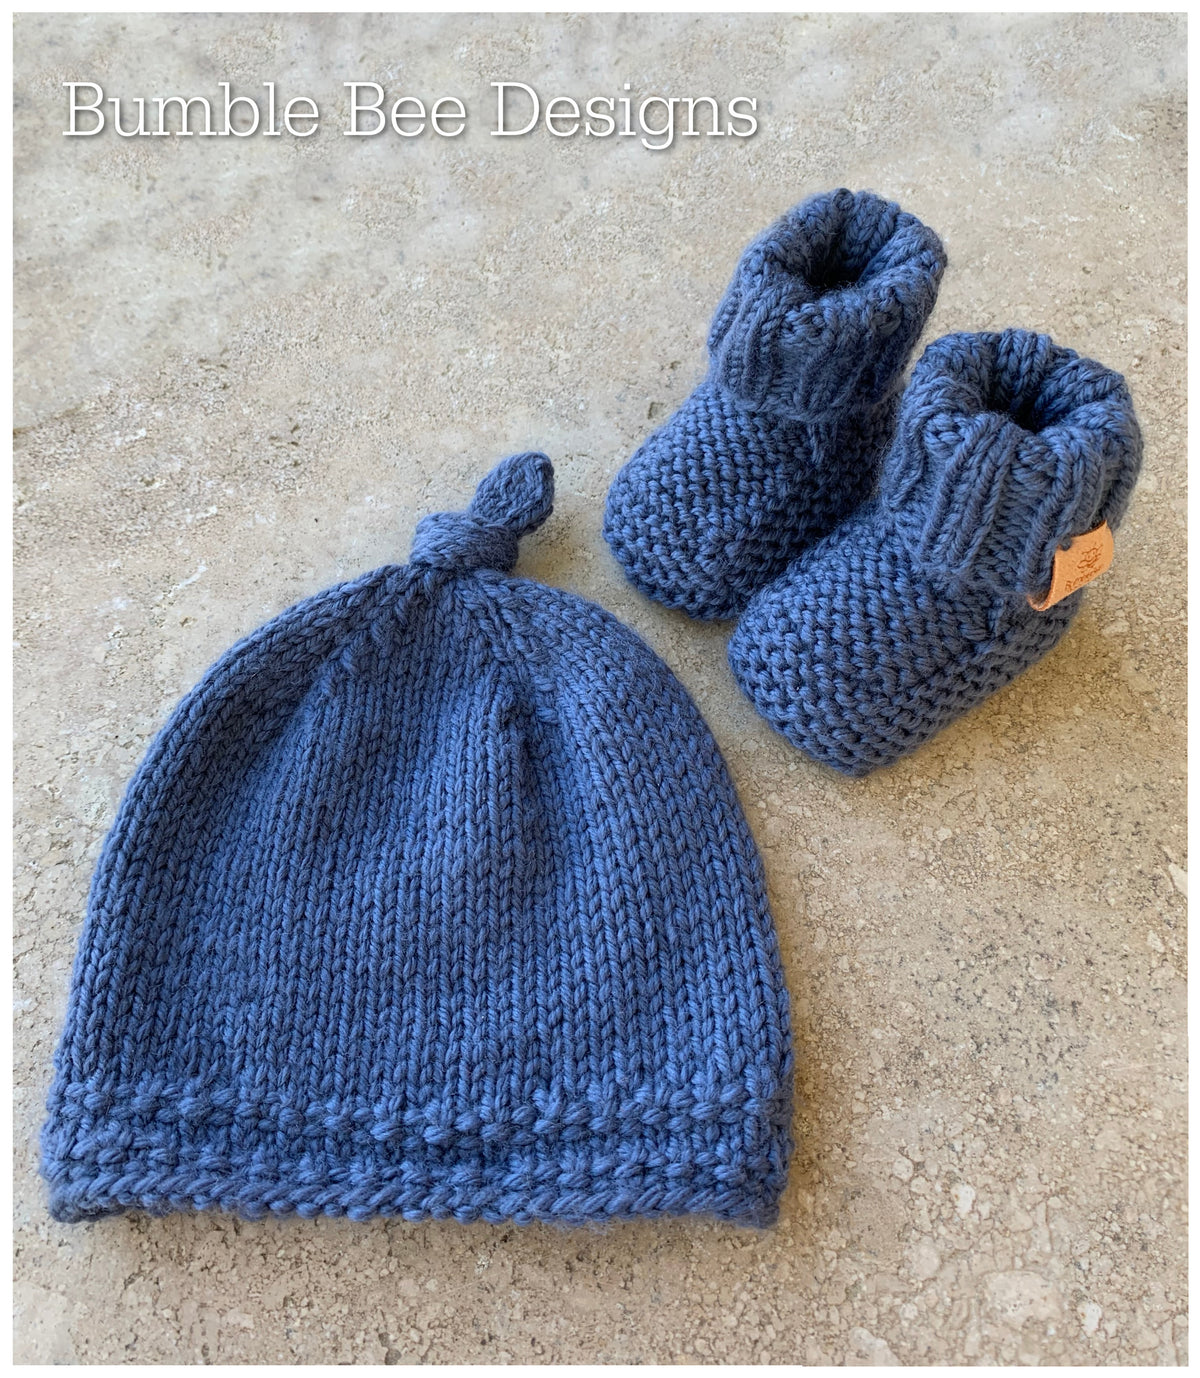 hand knitted top knot hat and matching booties, denim colour, sizes 0-12 months. softest australian merino wool, stay on booties